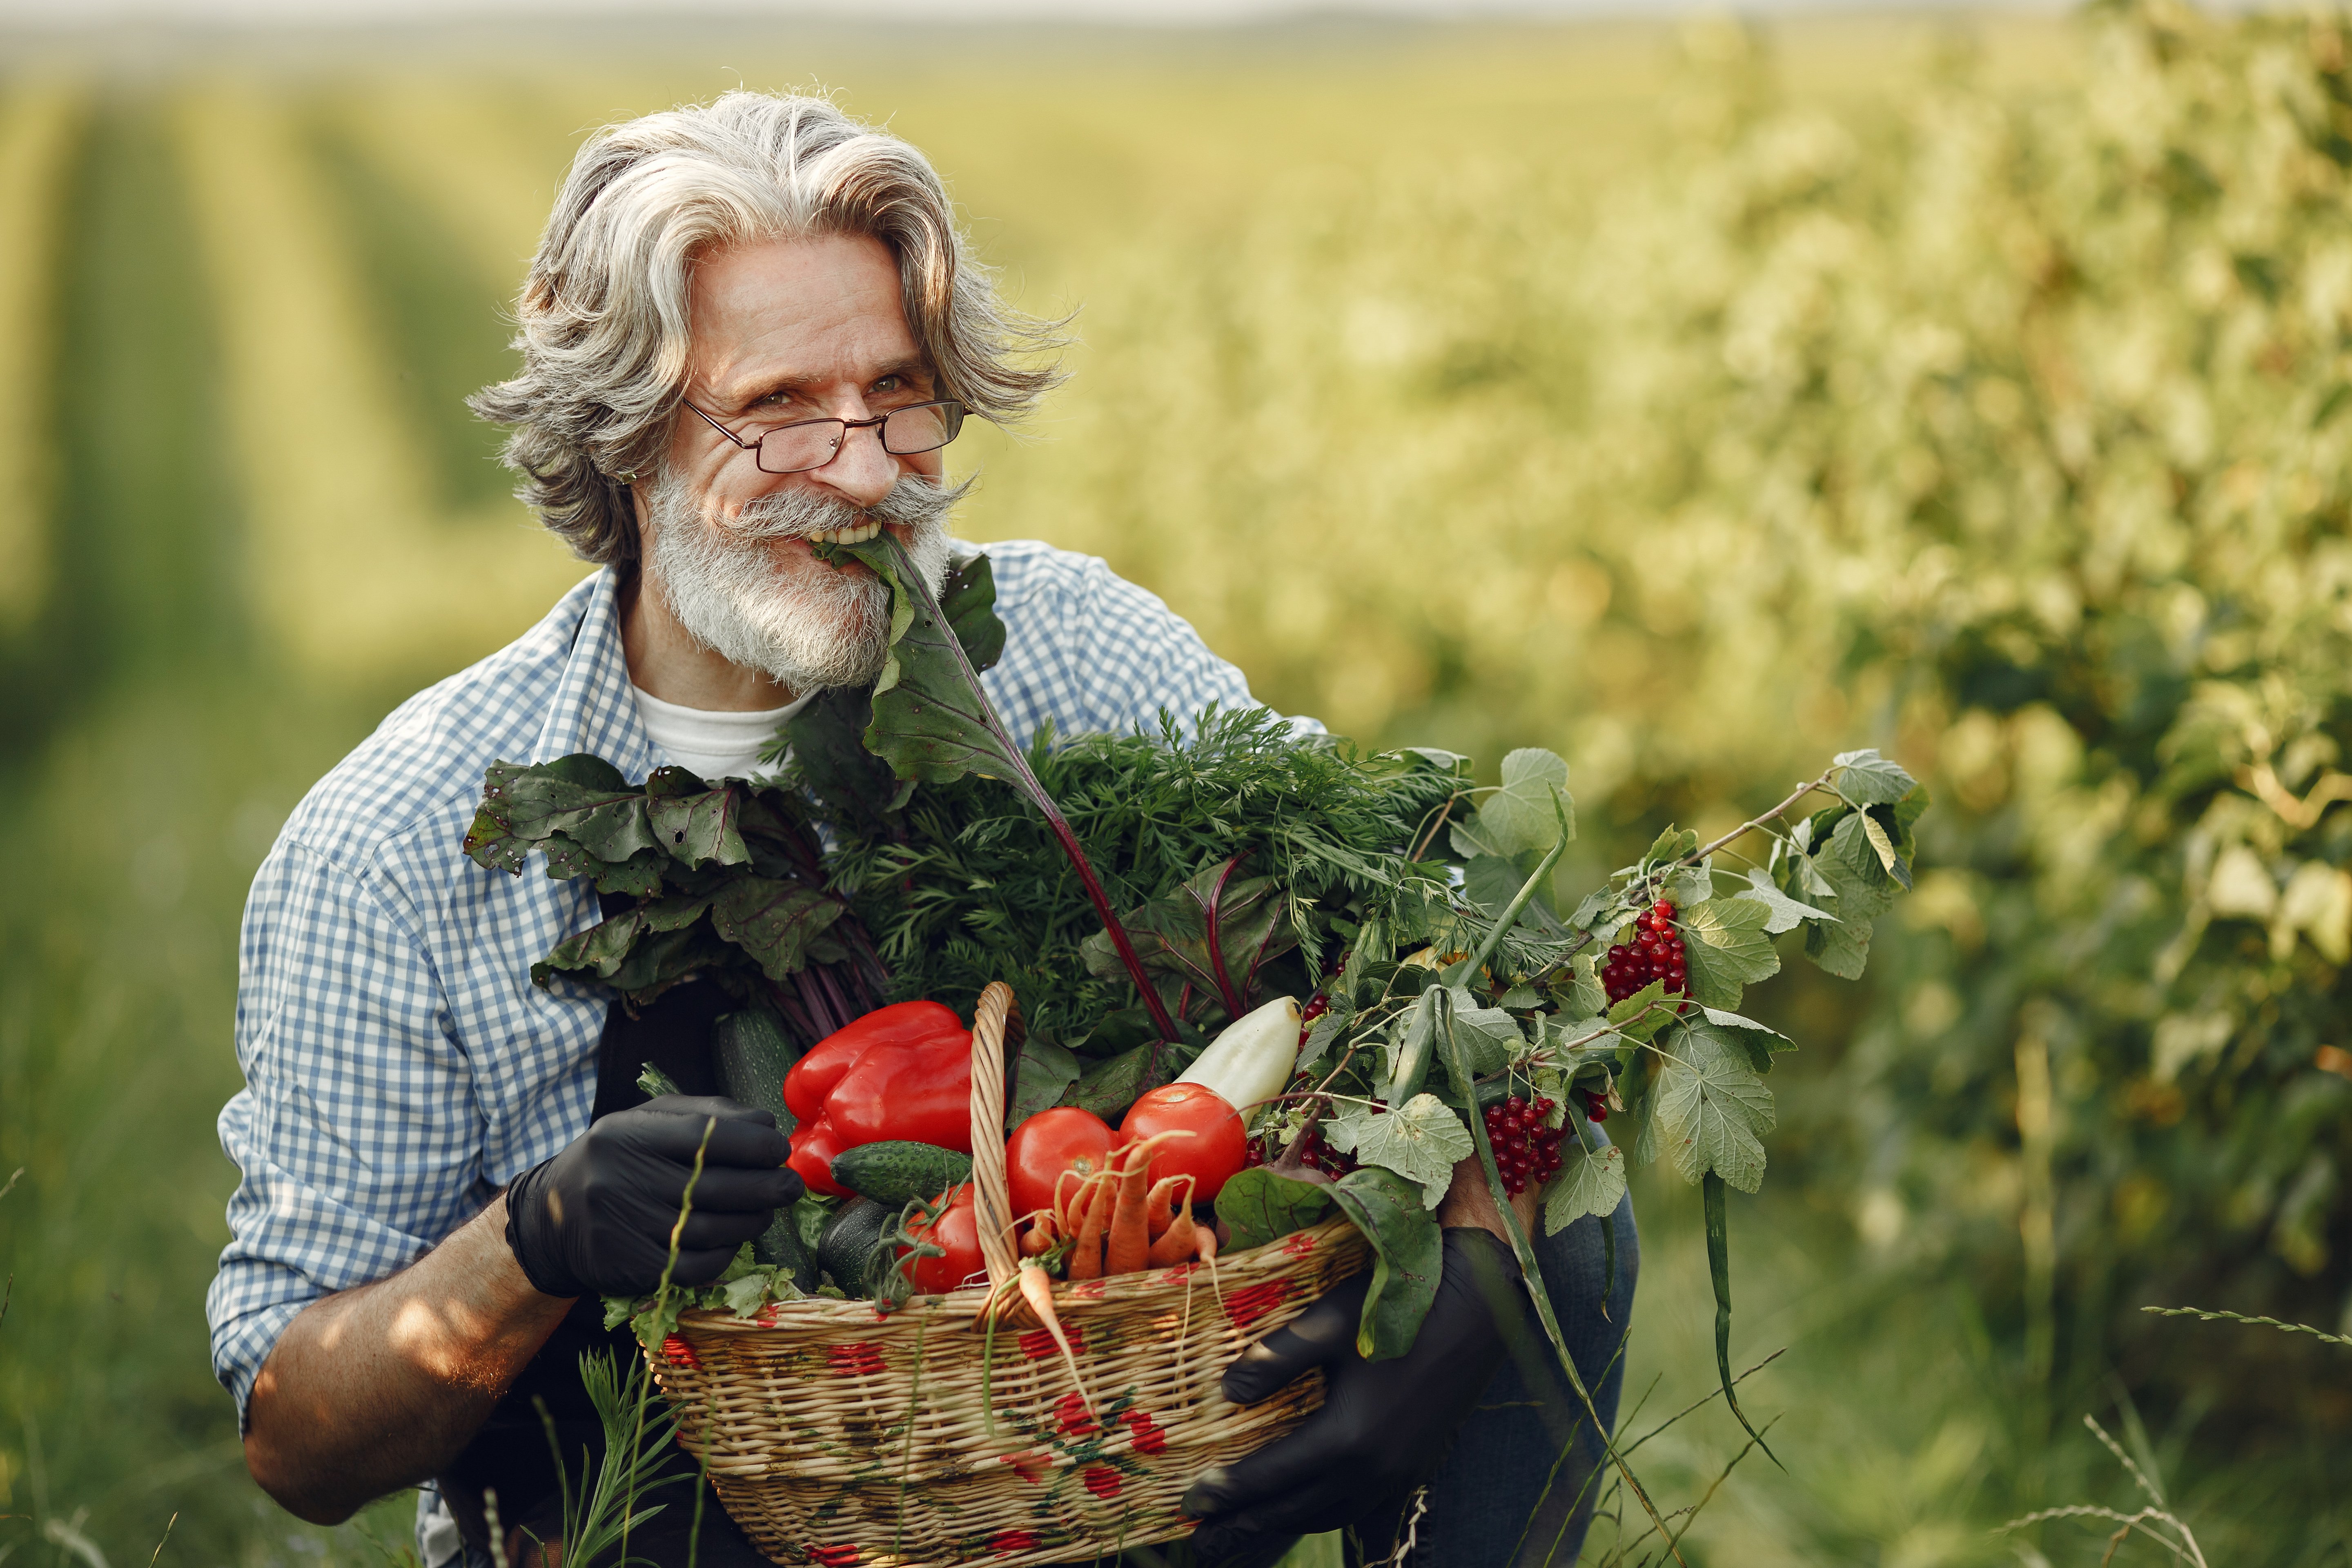 Man with a basket of vegetables